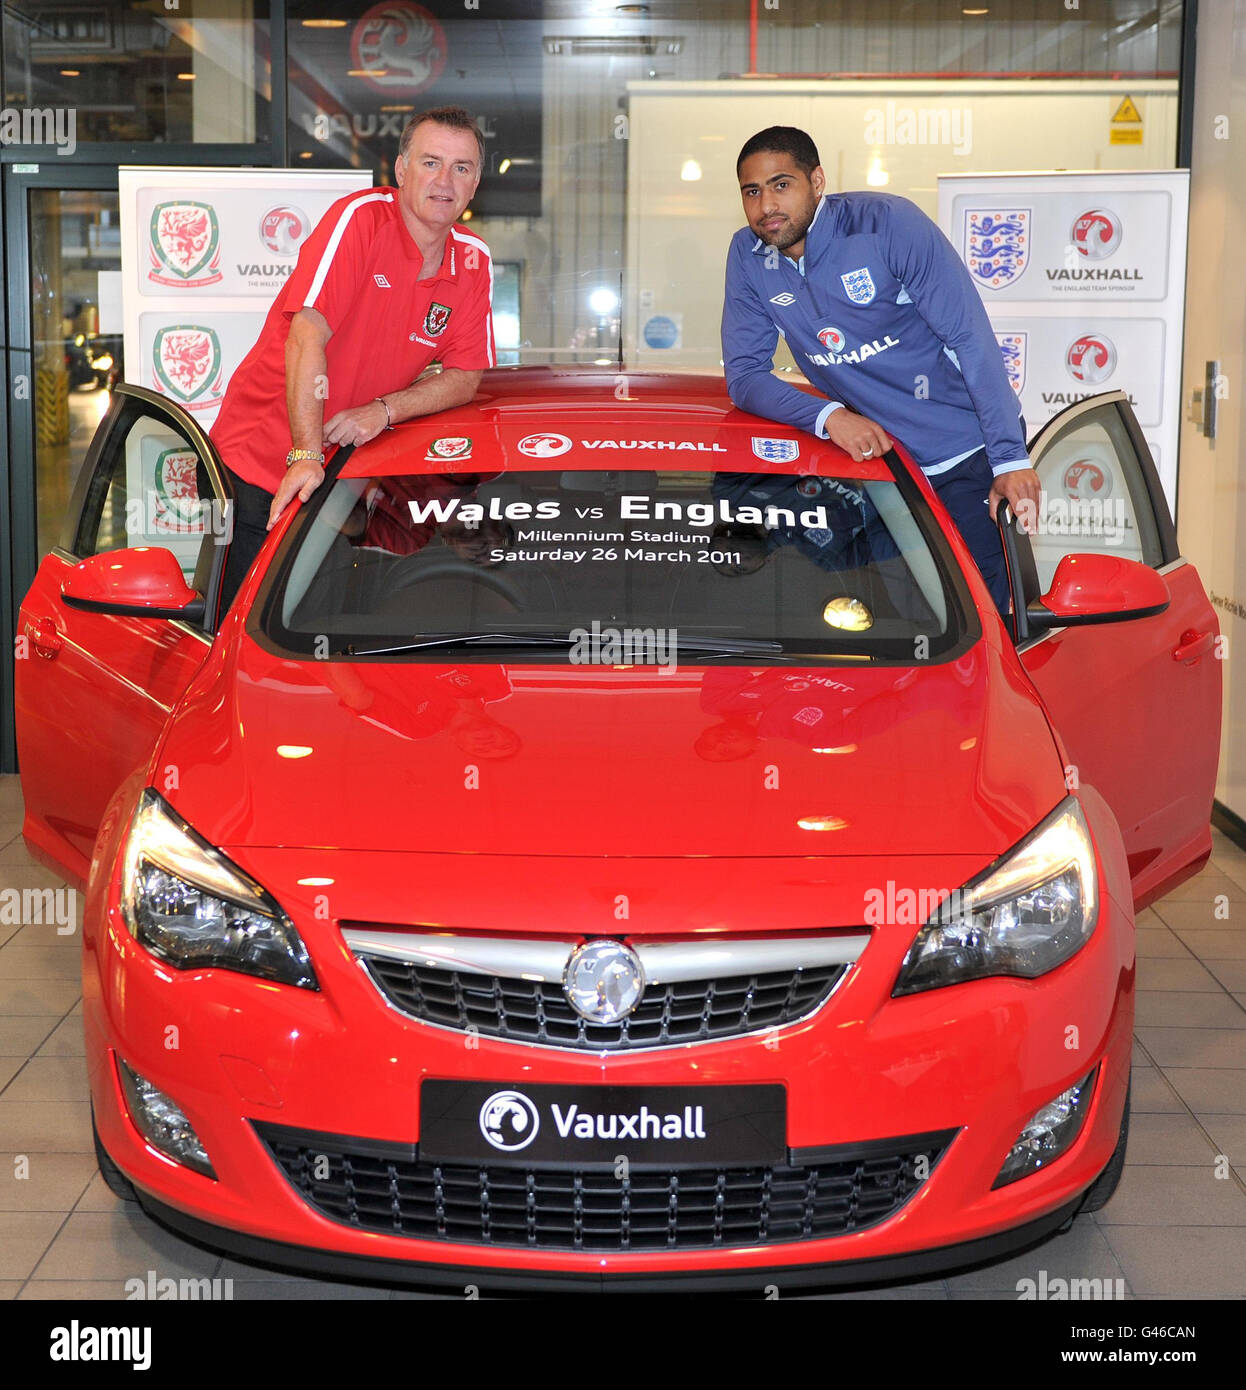 *STRICT EMBARGO UNTIL 2300, MONDAY MARCH 21, 2011* Liverpool and England player Glen Johnson with former Everton and Wales player Kevin Ratcliffe during a visit to the Astra production line and the Vauxhall factory in Ellesmere Port, Cheshire. Stock Photo